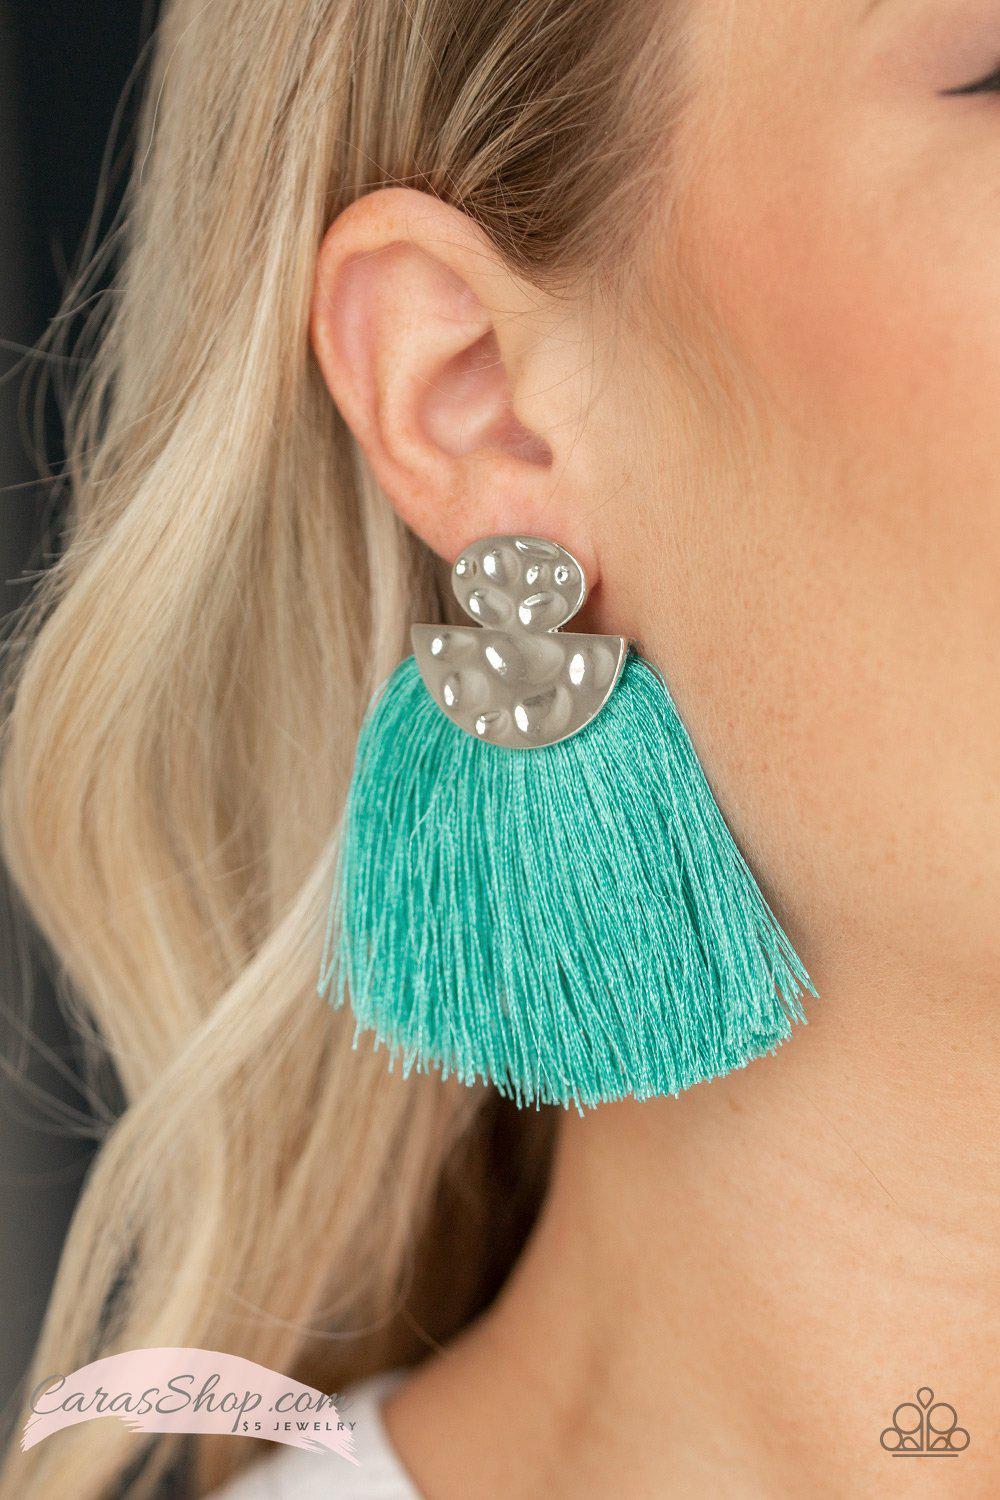 Make Some PLUME Blue Fringe Earrings - Paparazzi Accessories-CarasShop.com - $5 Jewelry by Cara Jewels